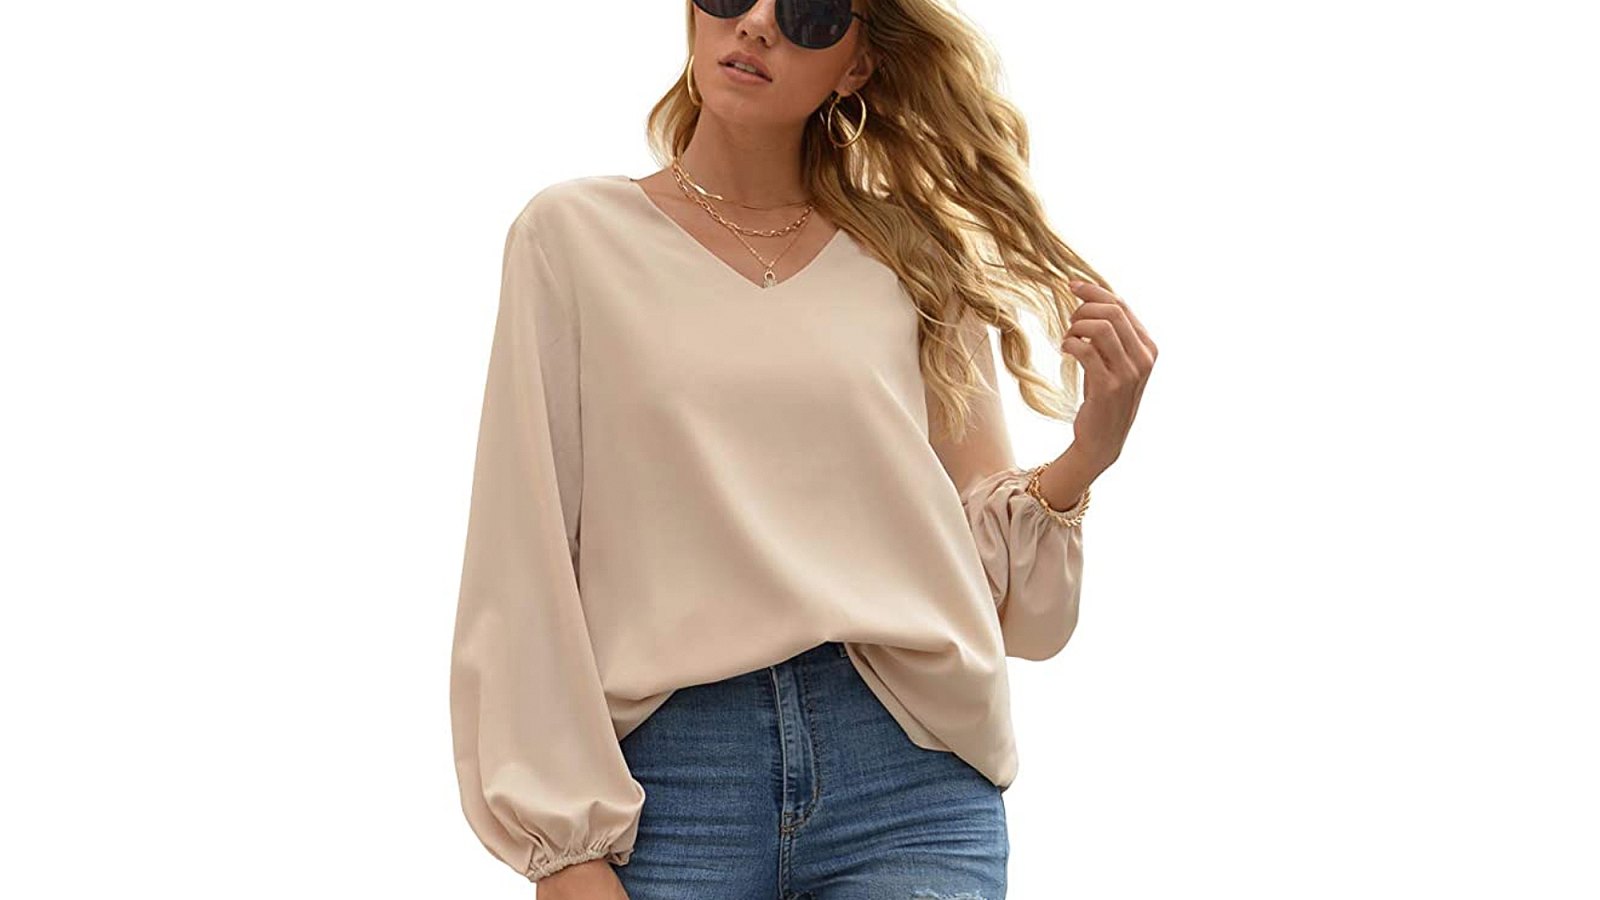 Wangzhi Silky Blouse Looks Amazing With Your Favorite Jeans